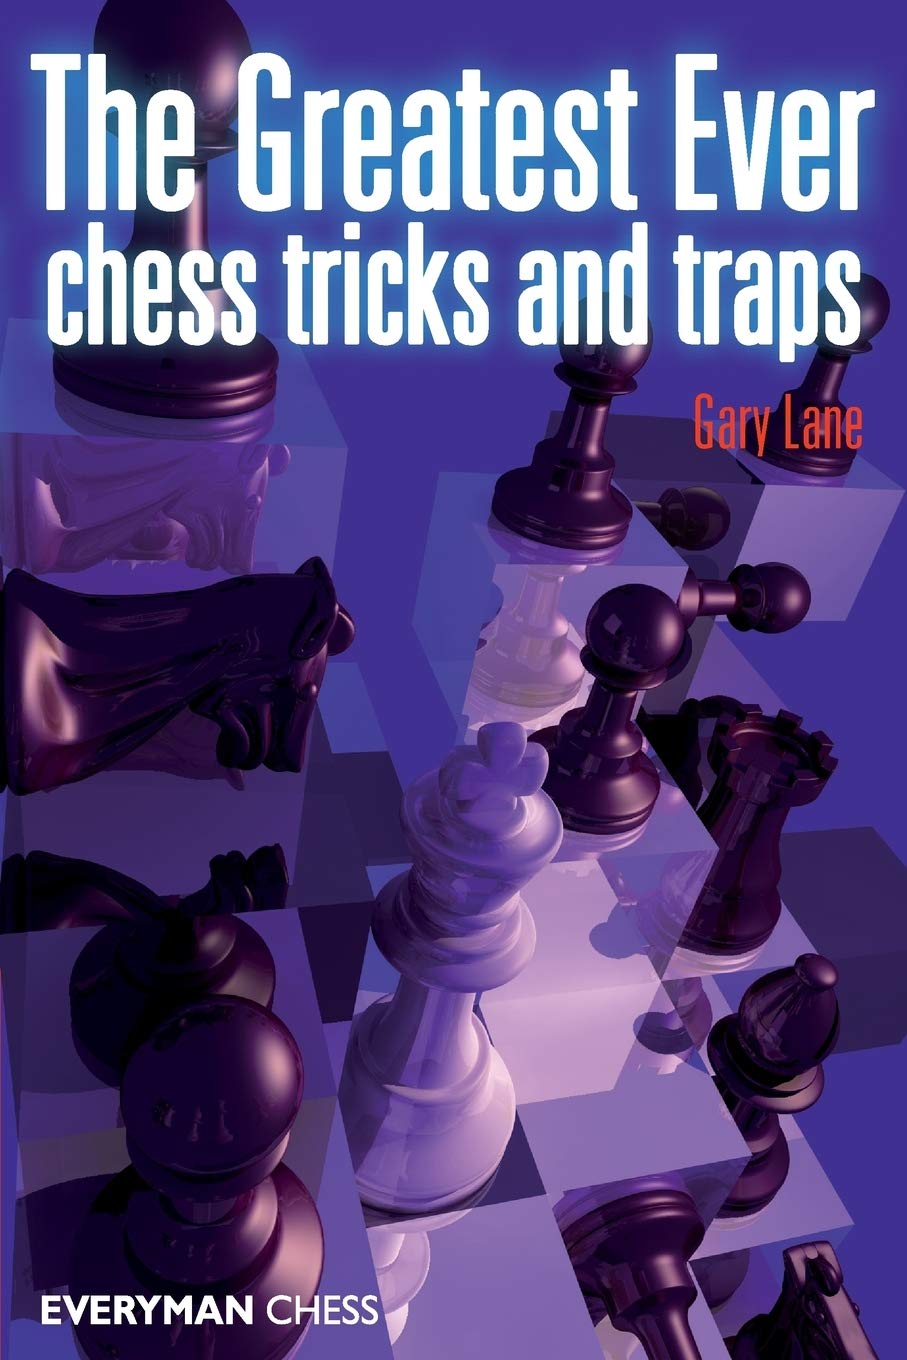 Lane, Gary (2008). The Greatest Ever Chess Tricks and Traps. Everyman Chess. ISBN 9781857445770.